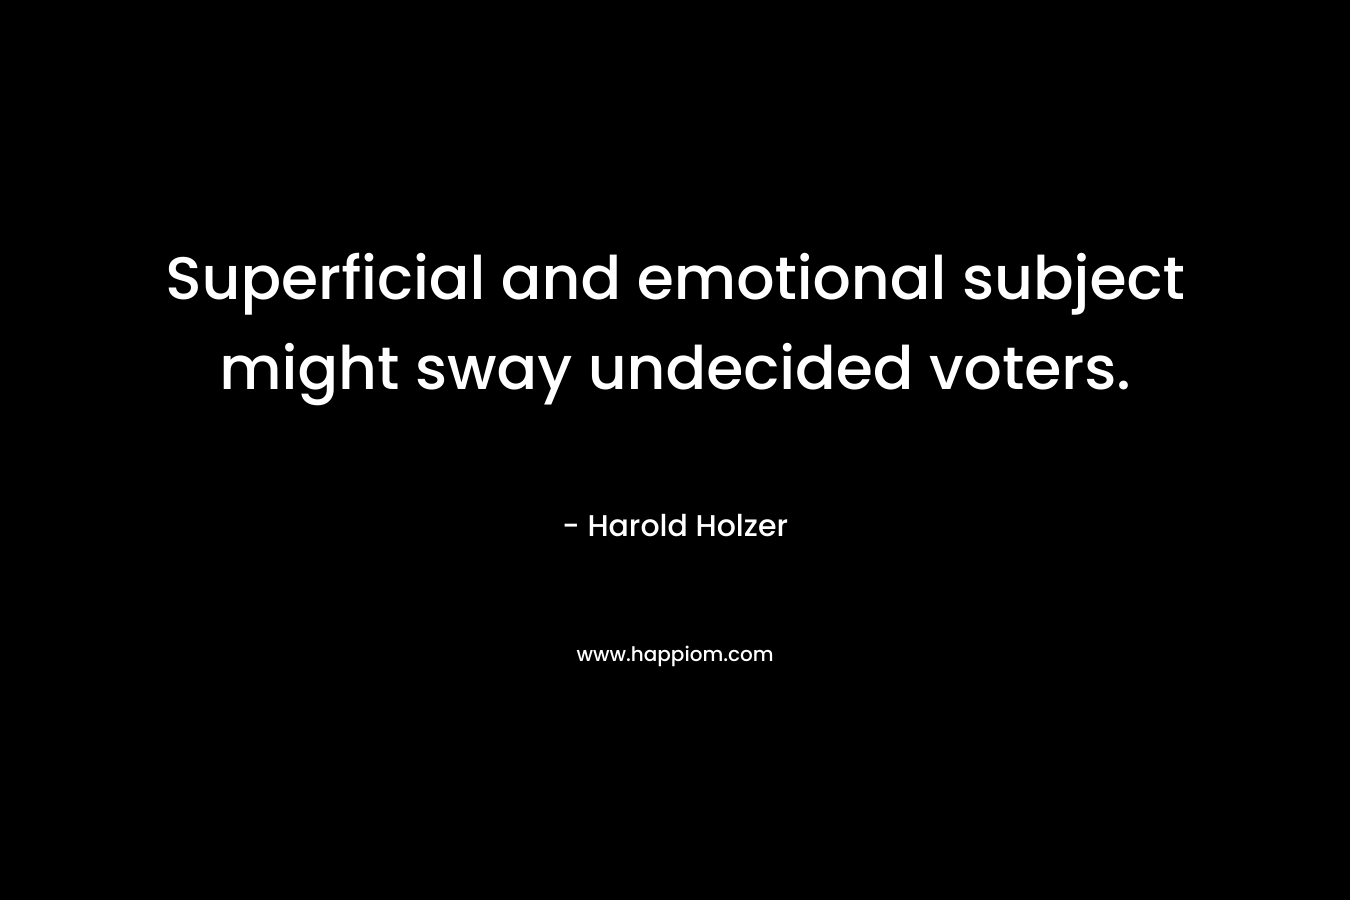 Superficial and emotional subject might sway undecided voters.